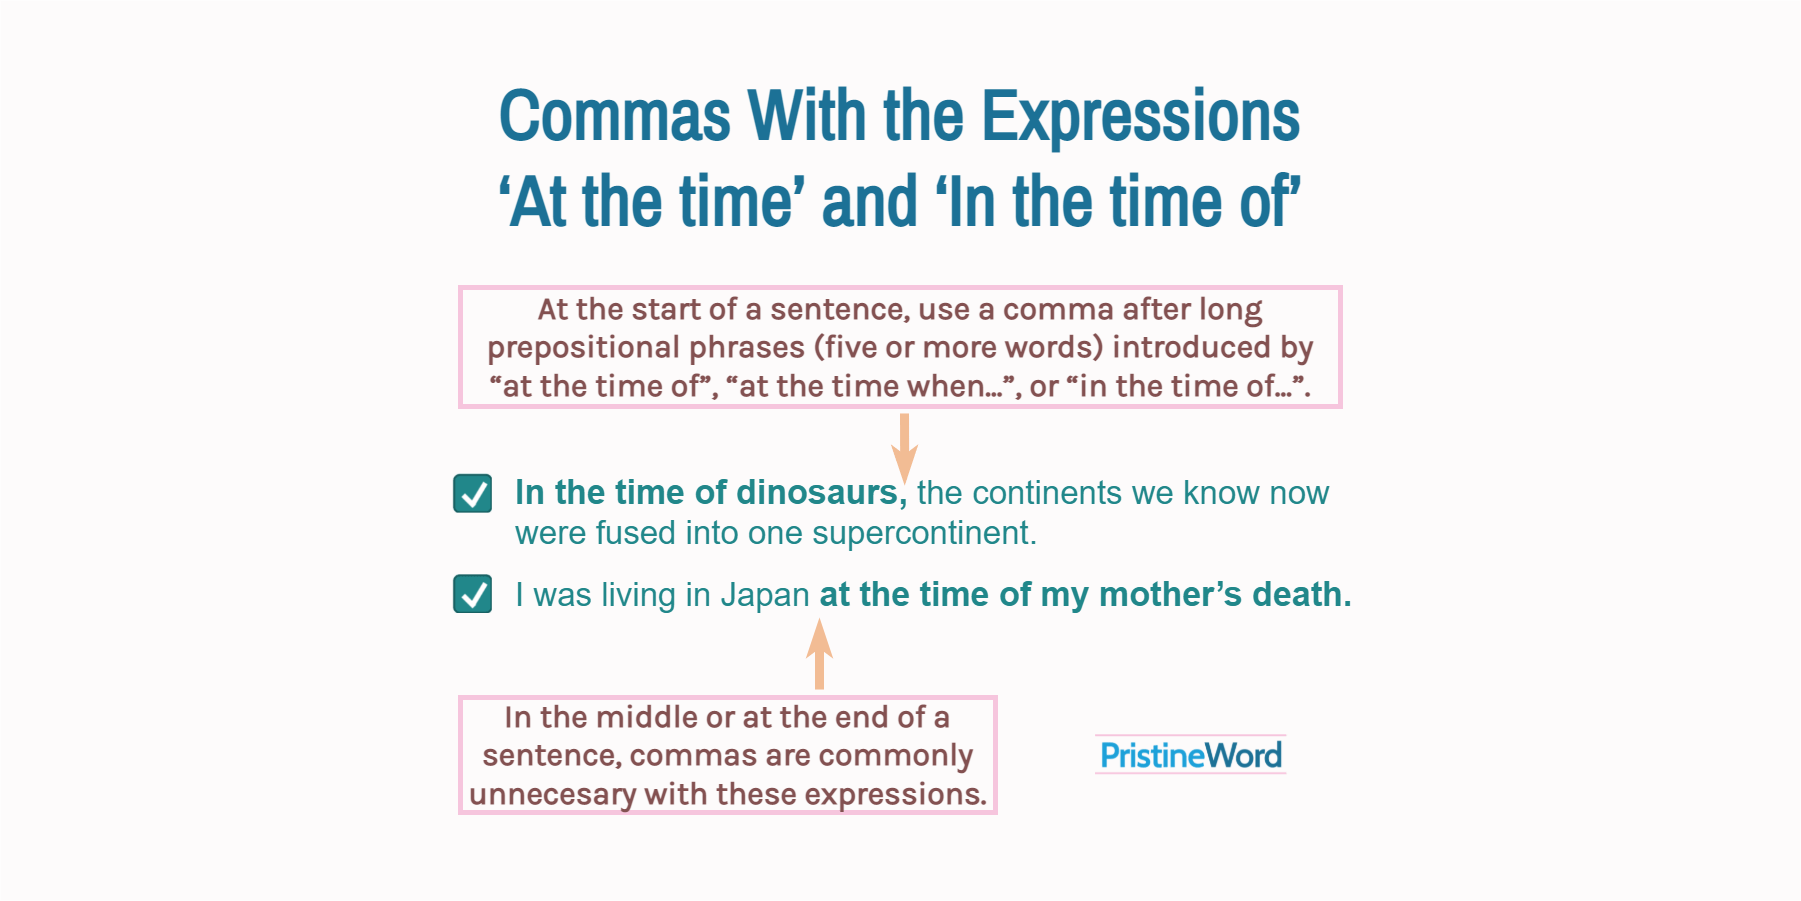 Commas With the Expressions ‘At the time’ and ‘In the time of’